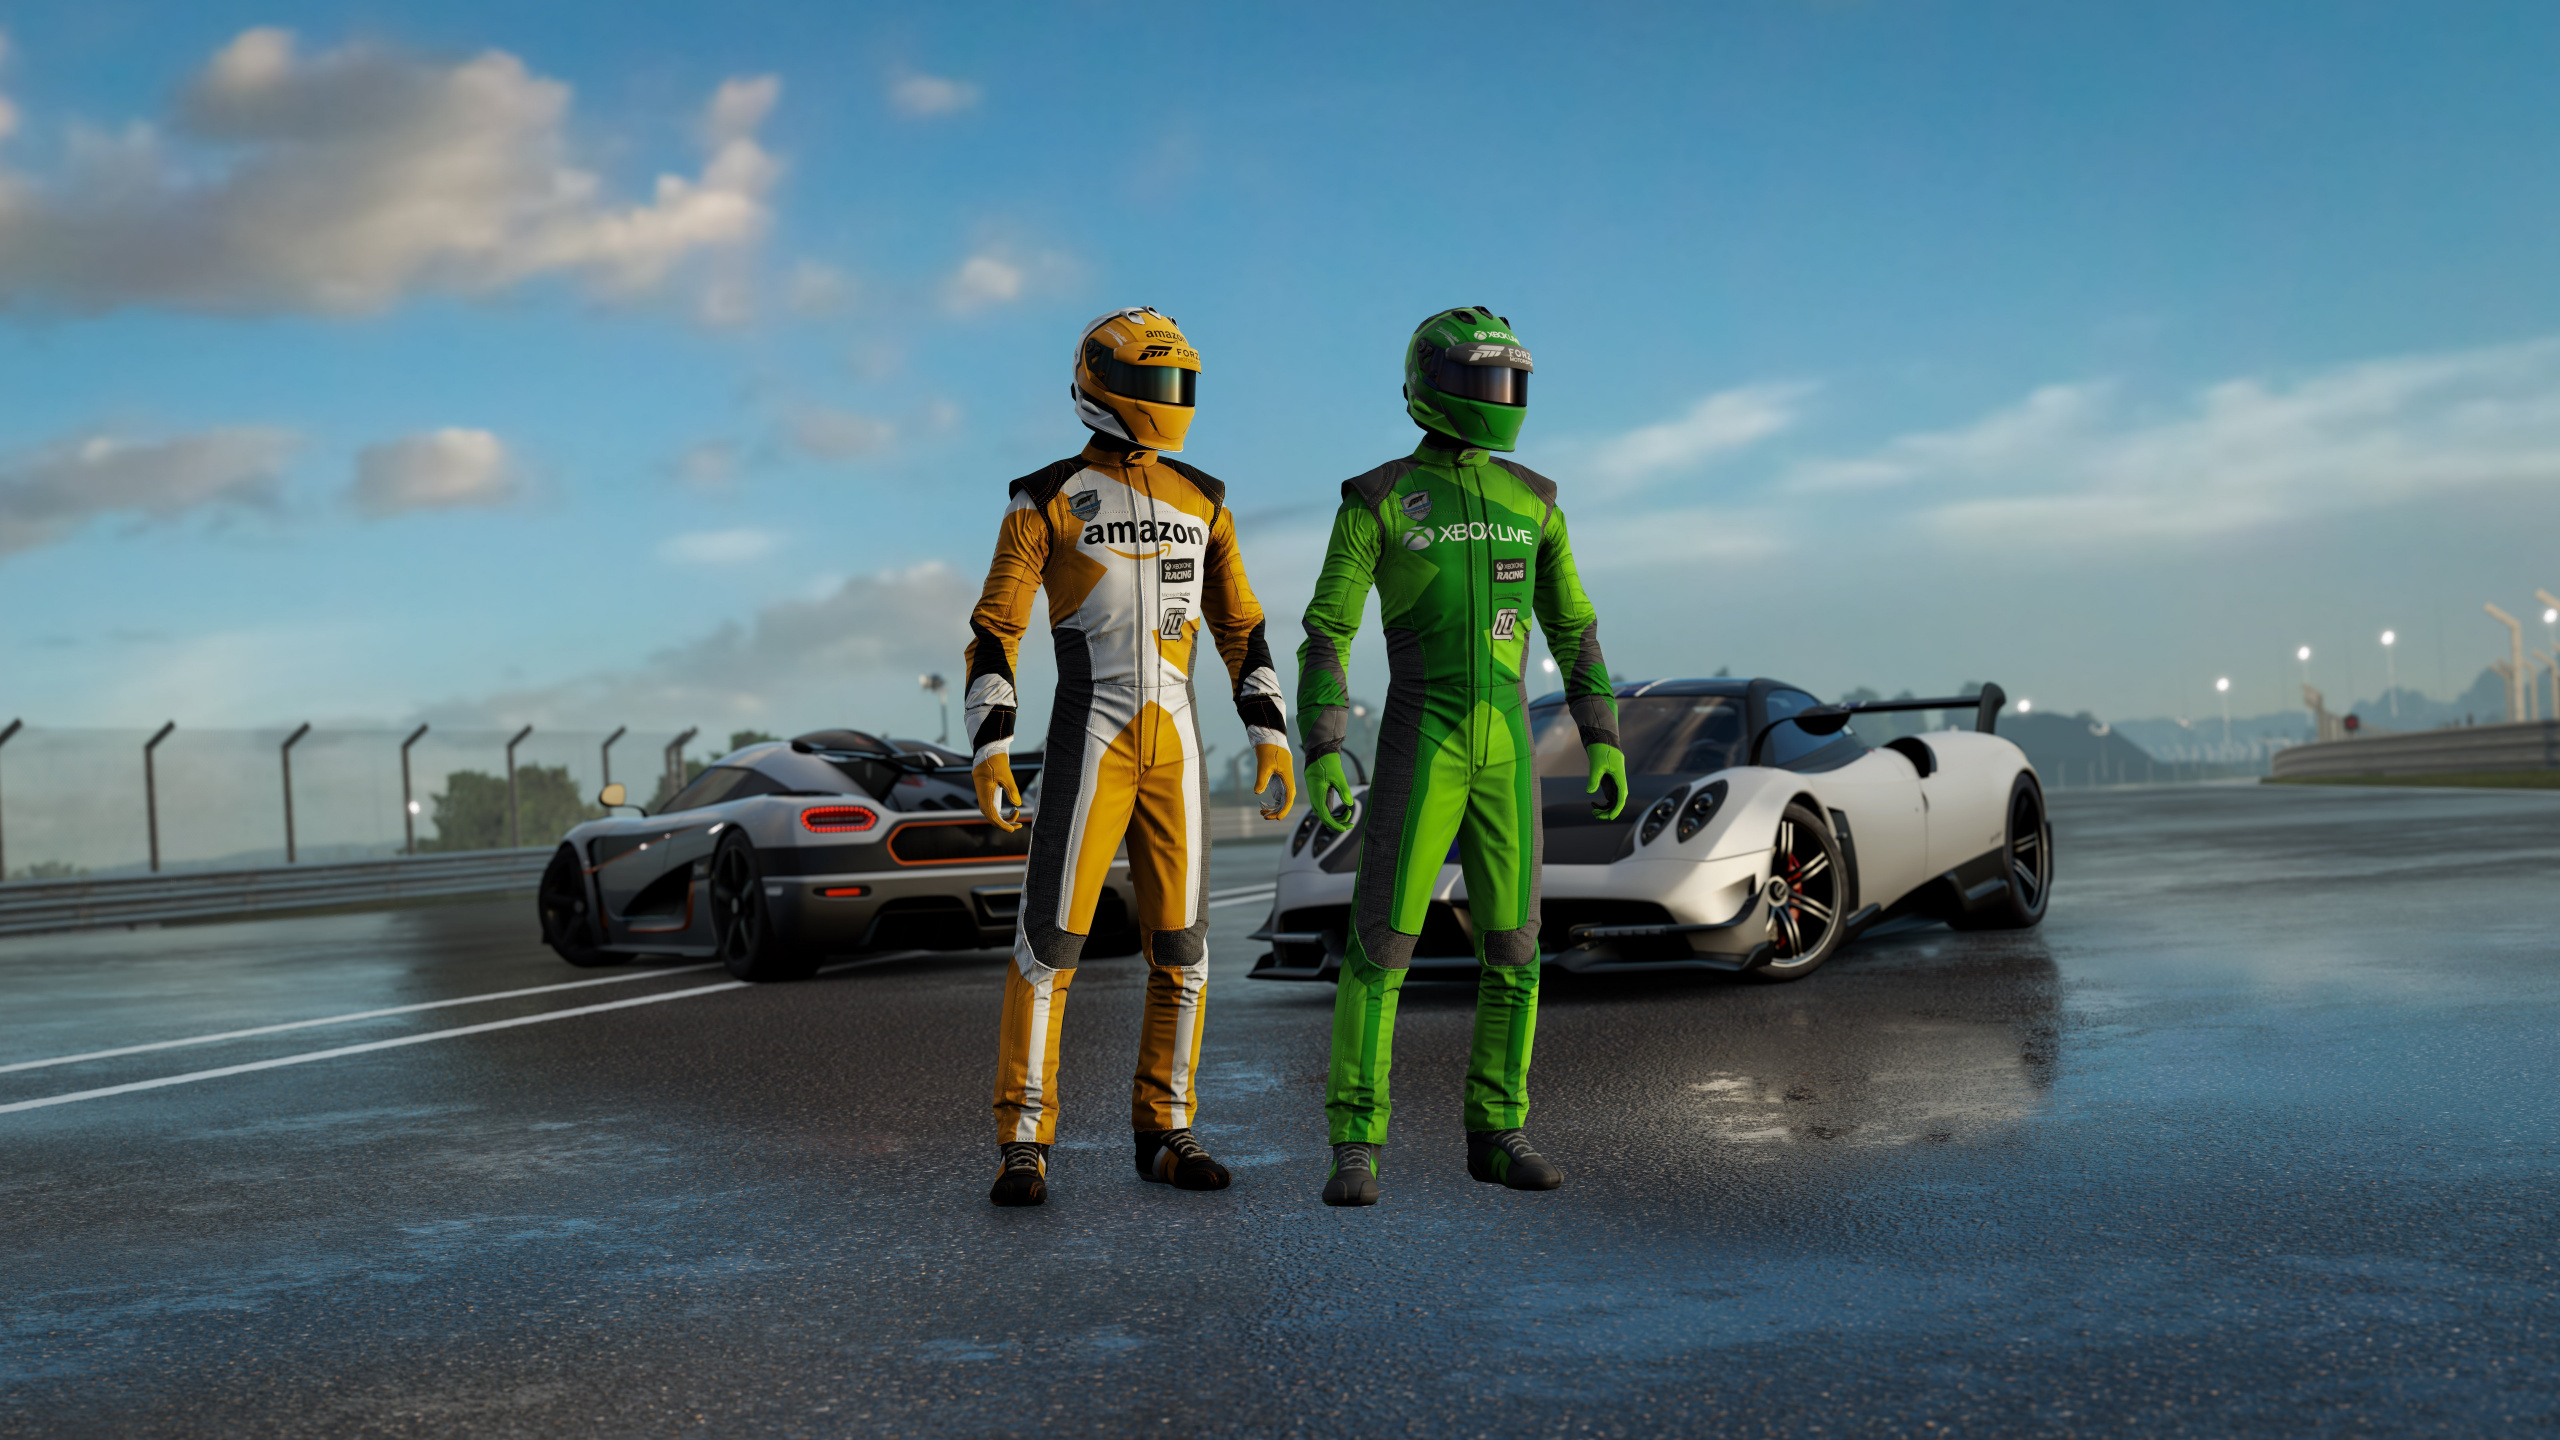 2 Men in Green and Yellow Helmet and Helmet Standing Beside White Sports Car During Daytime. Wallpaper in 2560x1440 Resolution